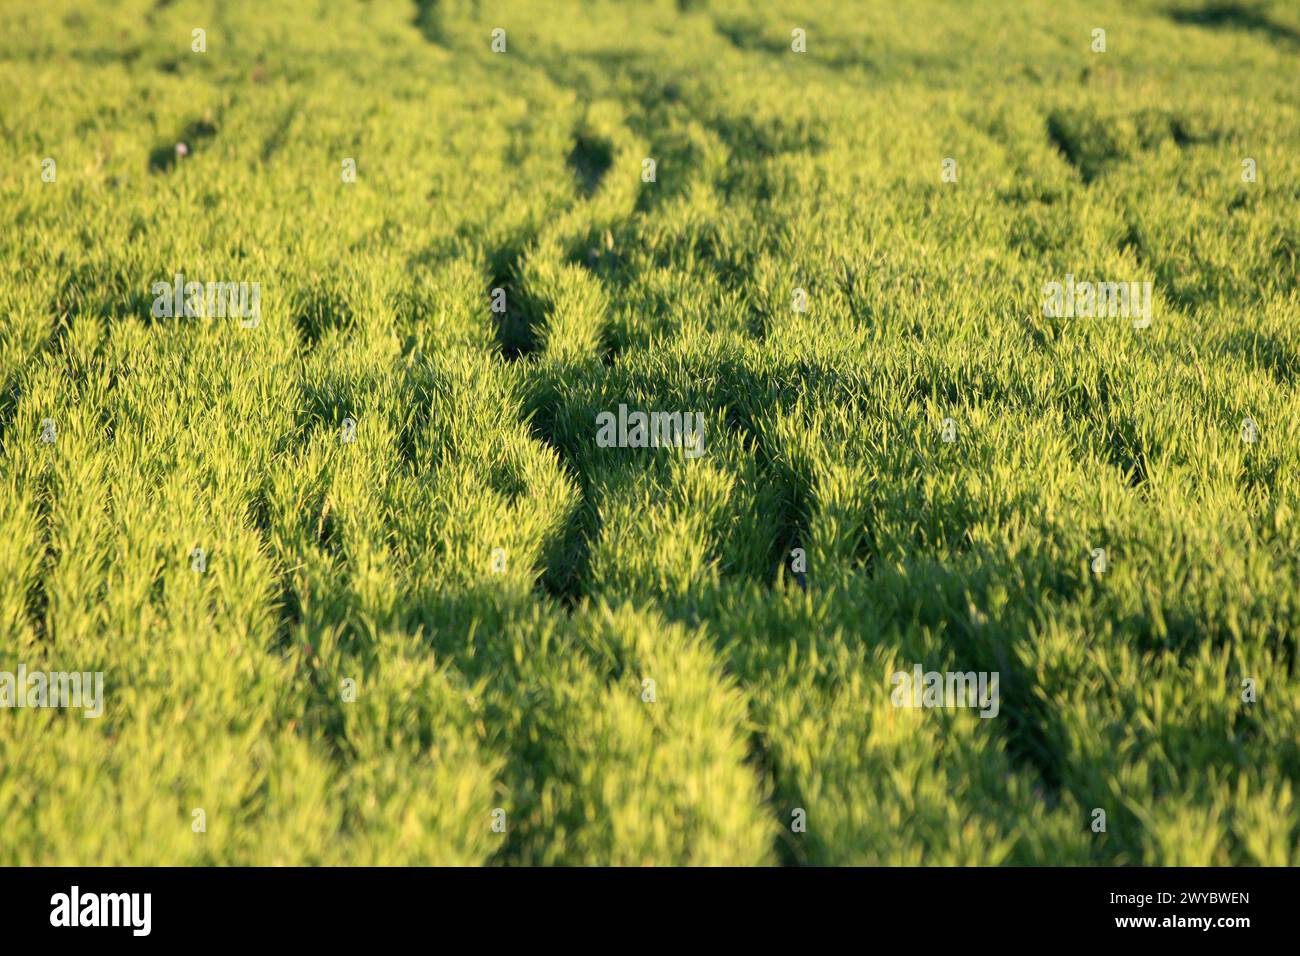 Field of fresh green densely planted Common wheat or Triticum aestivum or bread wheat cultivated homegrown wheat species growing in tight rows Stock Photo